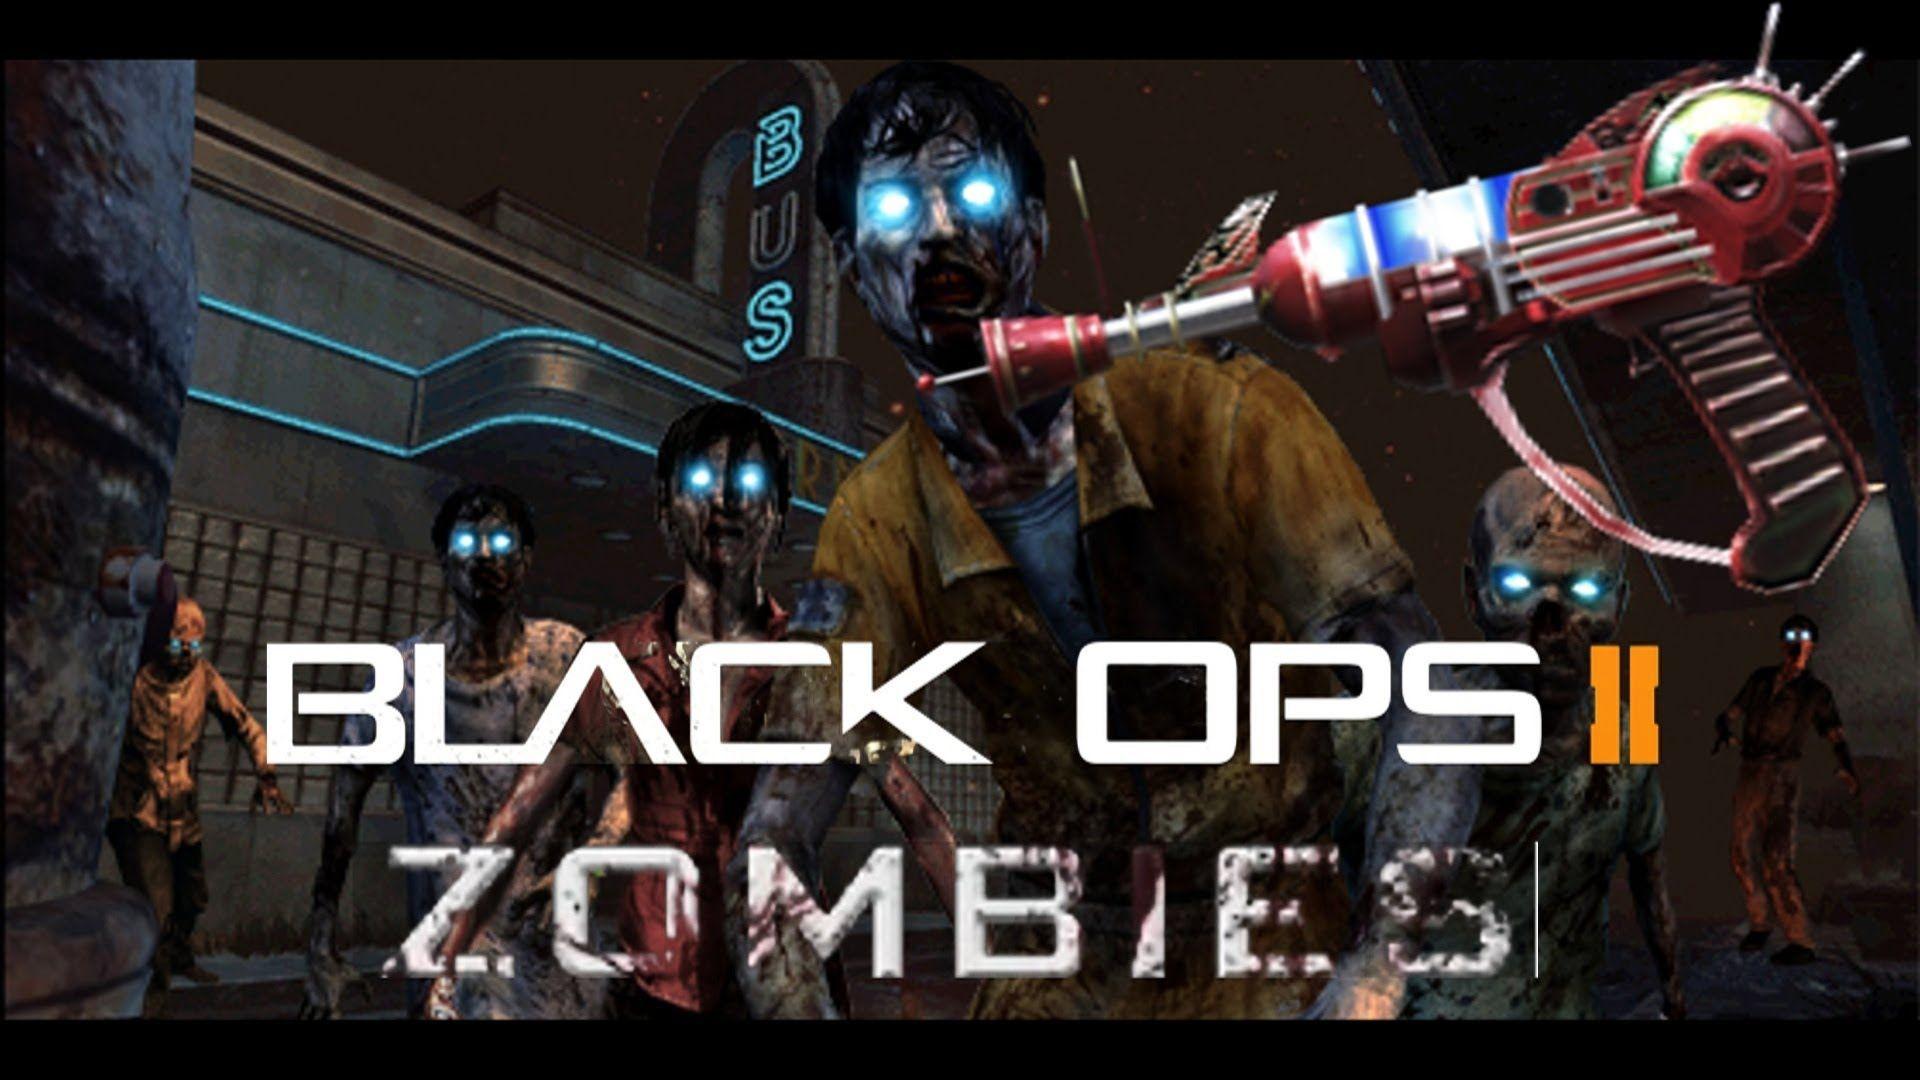 call of duty black ops zombies